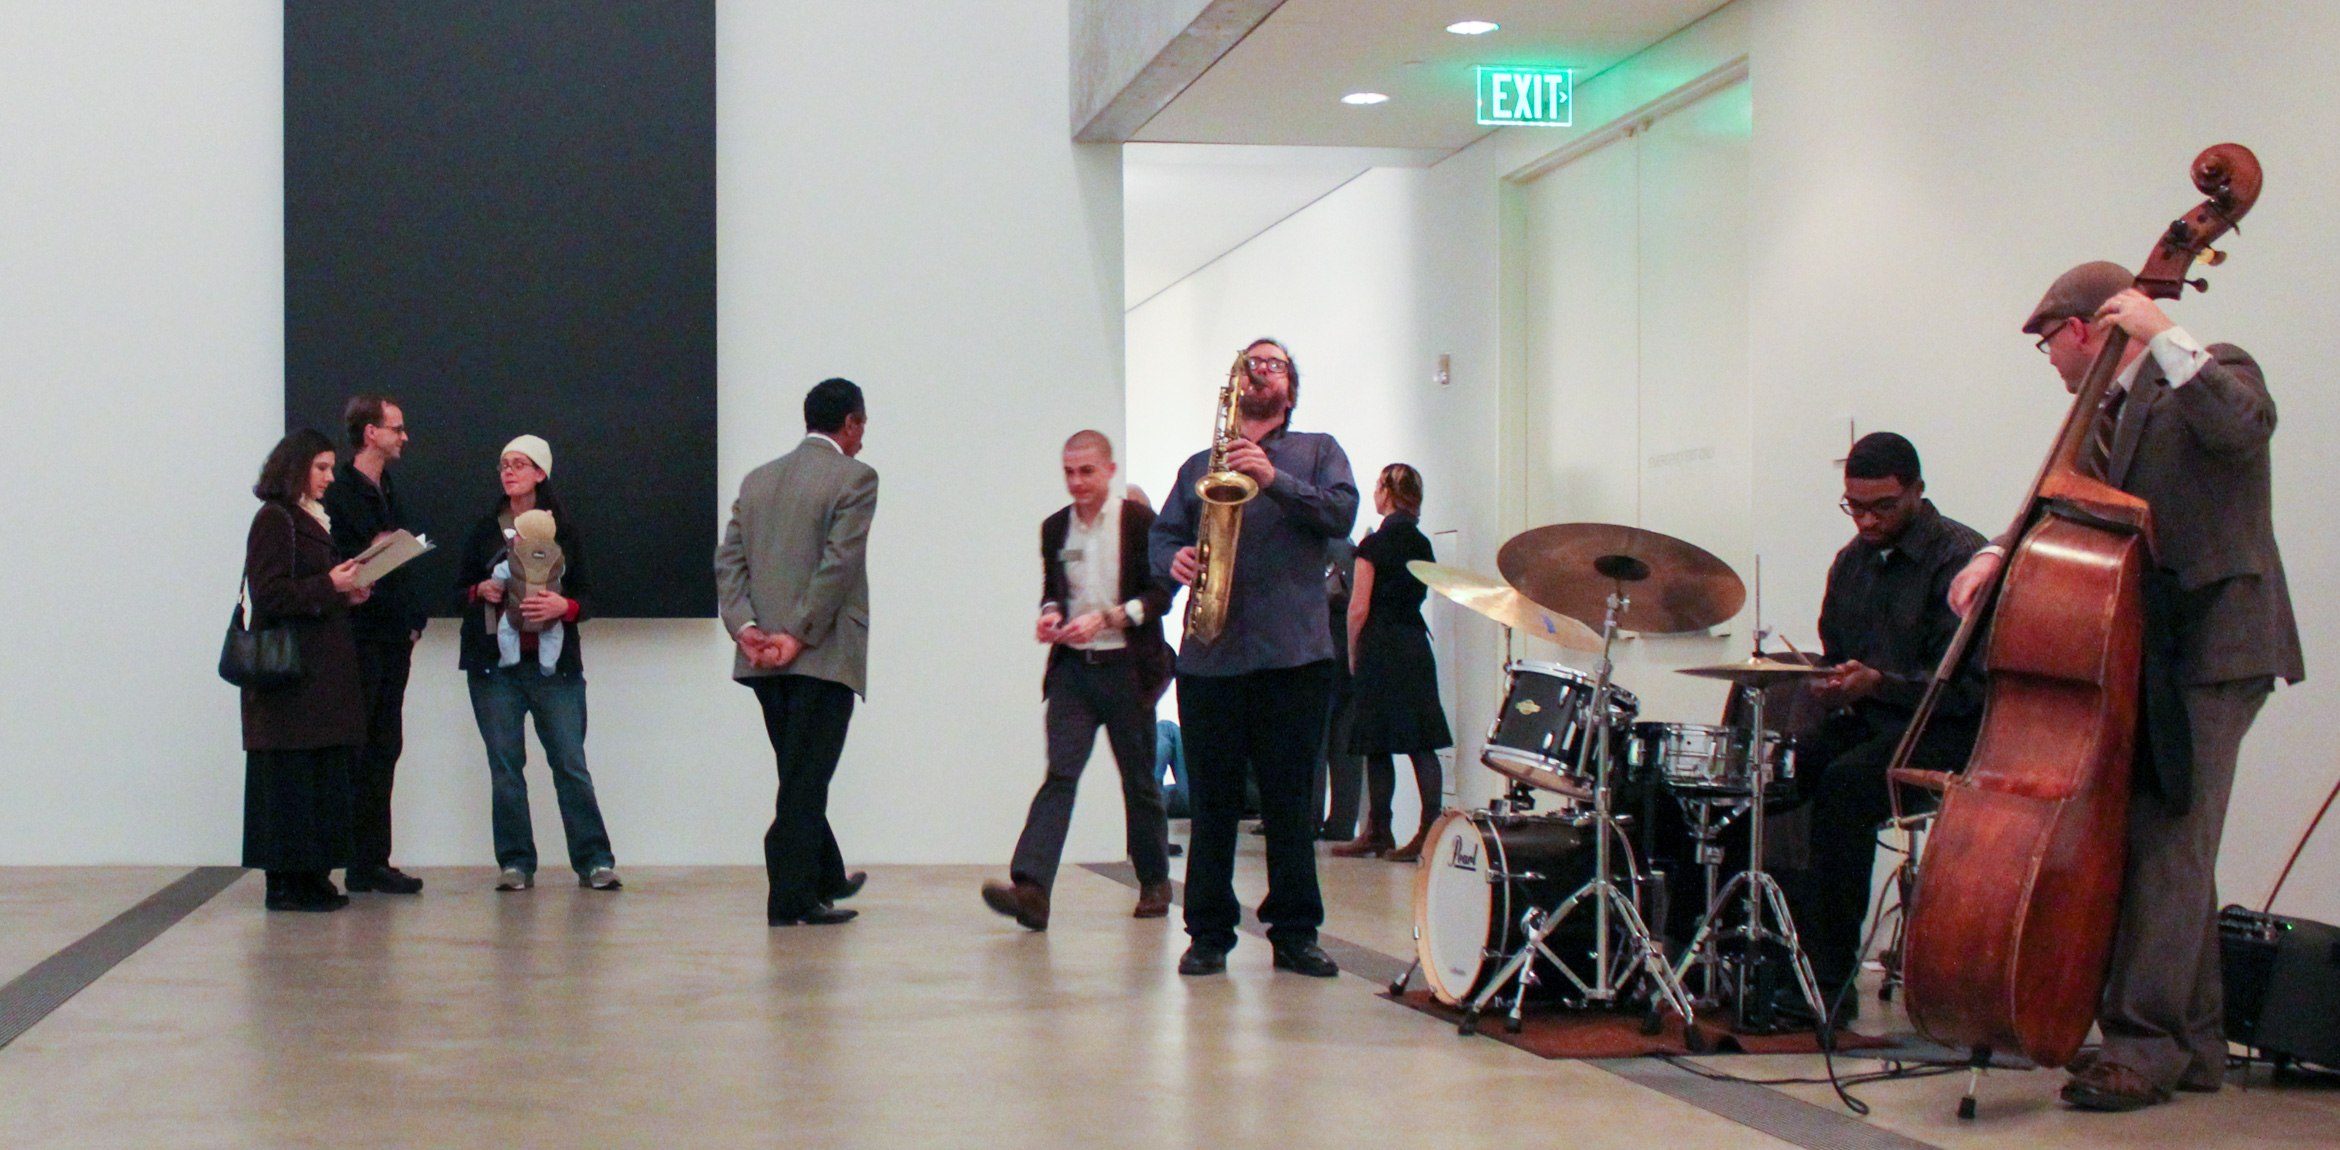 Jazz trio performs in the Lower-Main Gallery while guests visit.